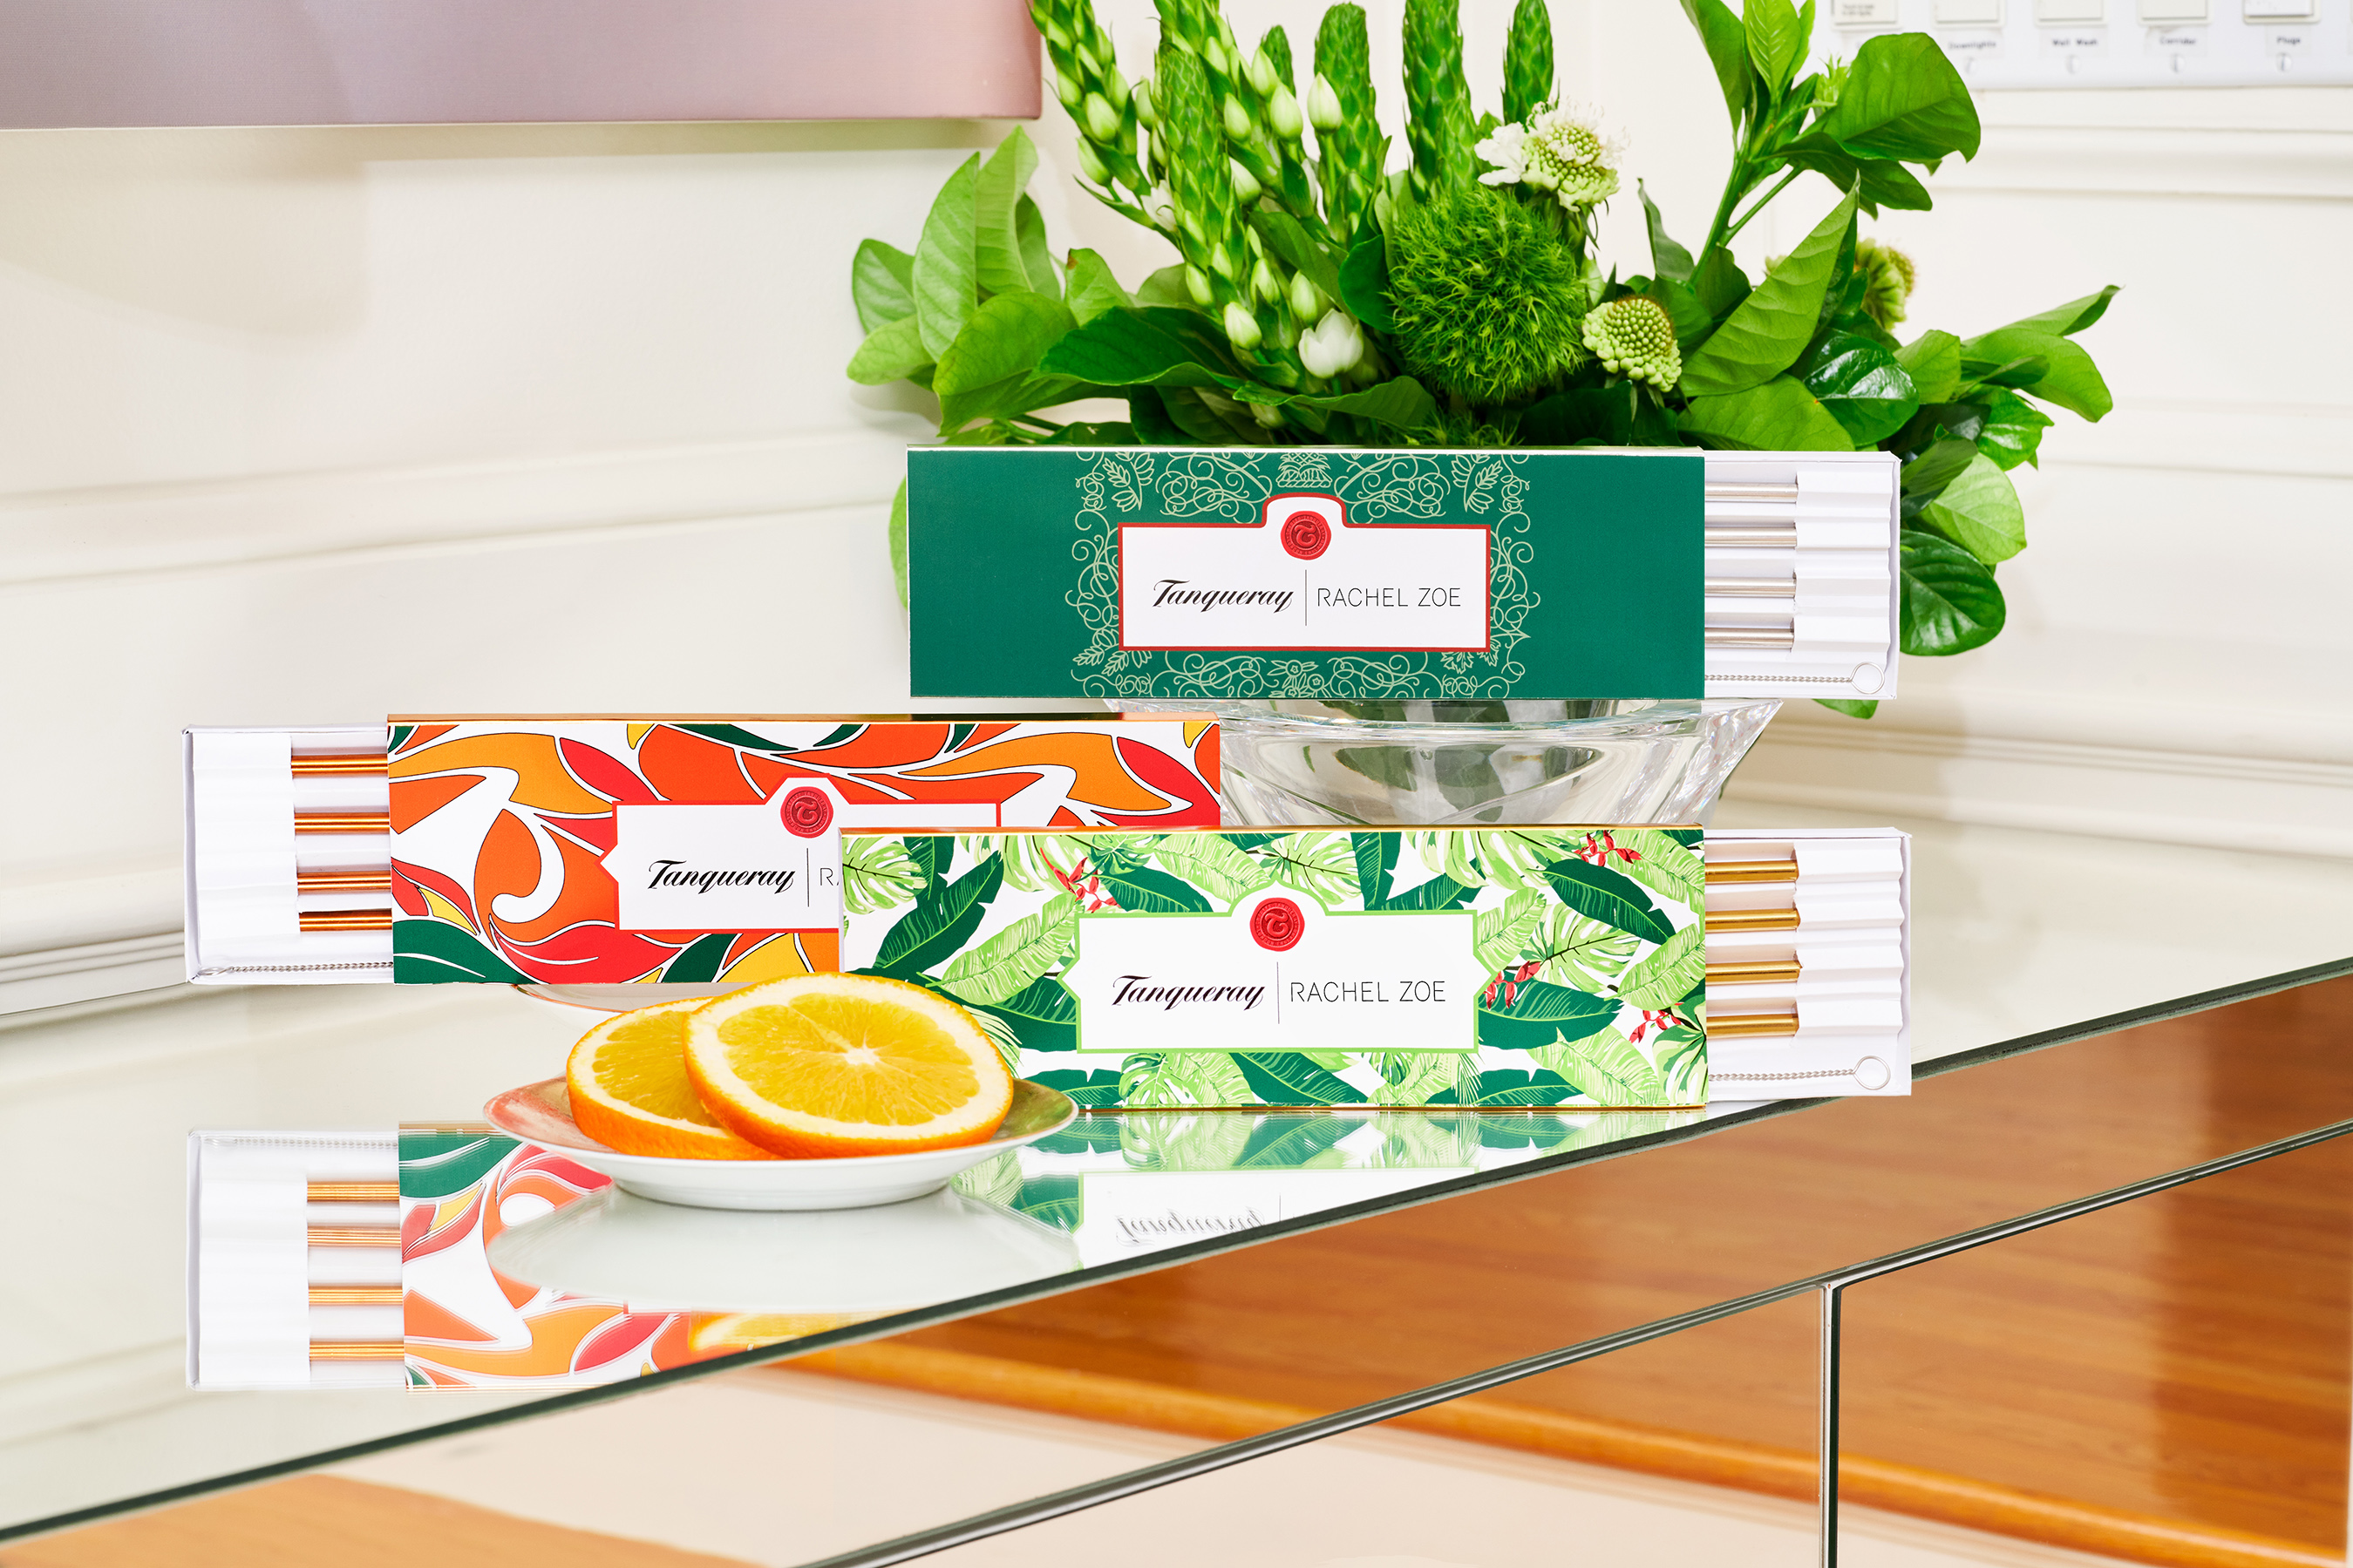 Fashion icon and CEO Rachel Zoe personally selected designs from her collection for the Rachel Zoe x Tanqueray Straw Capsule Collection, ensuring that each motif perfectly complements the three corresponding Tanqueray cans.